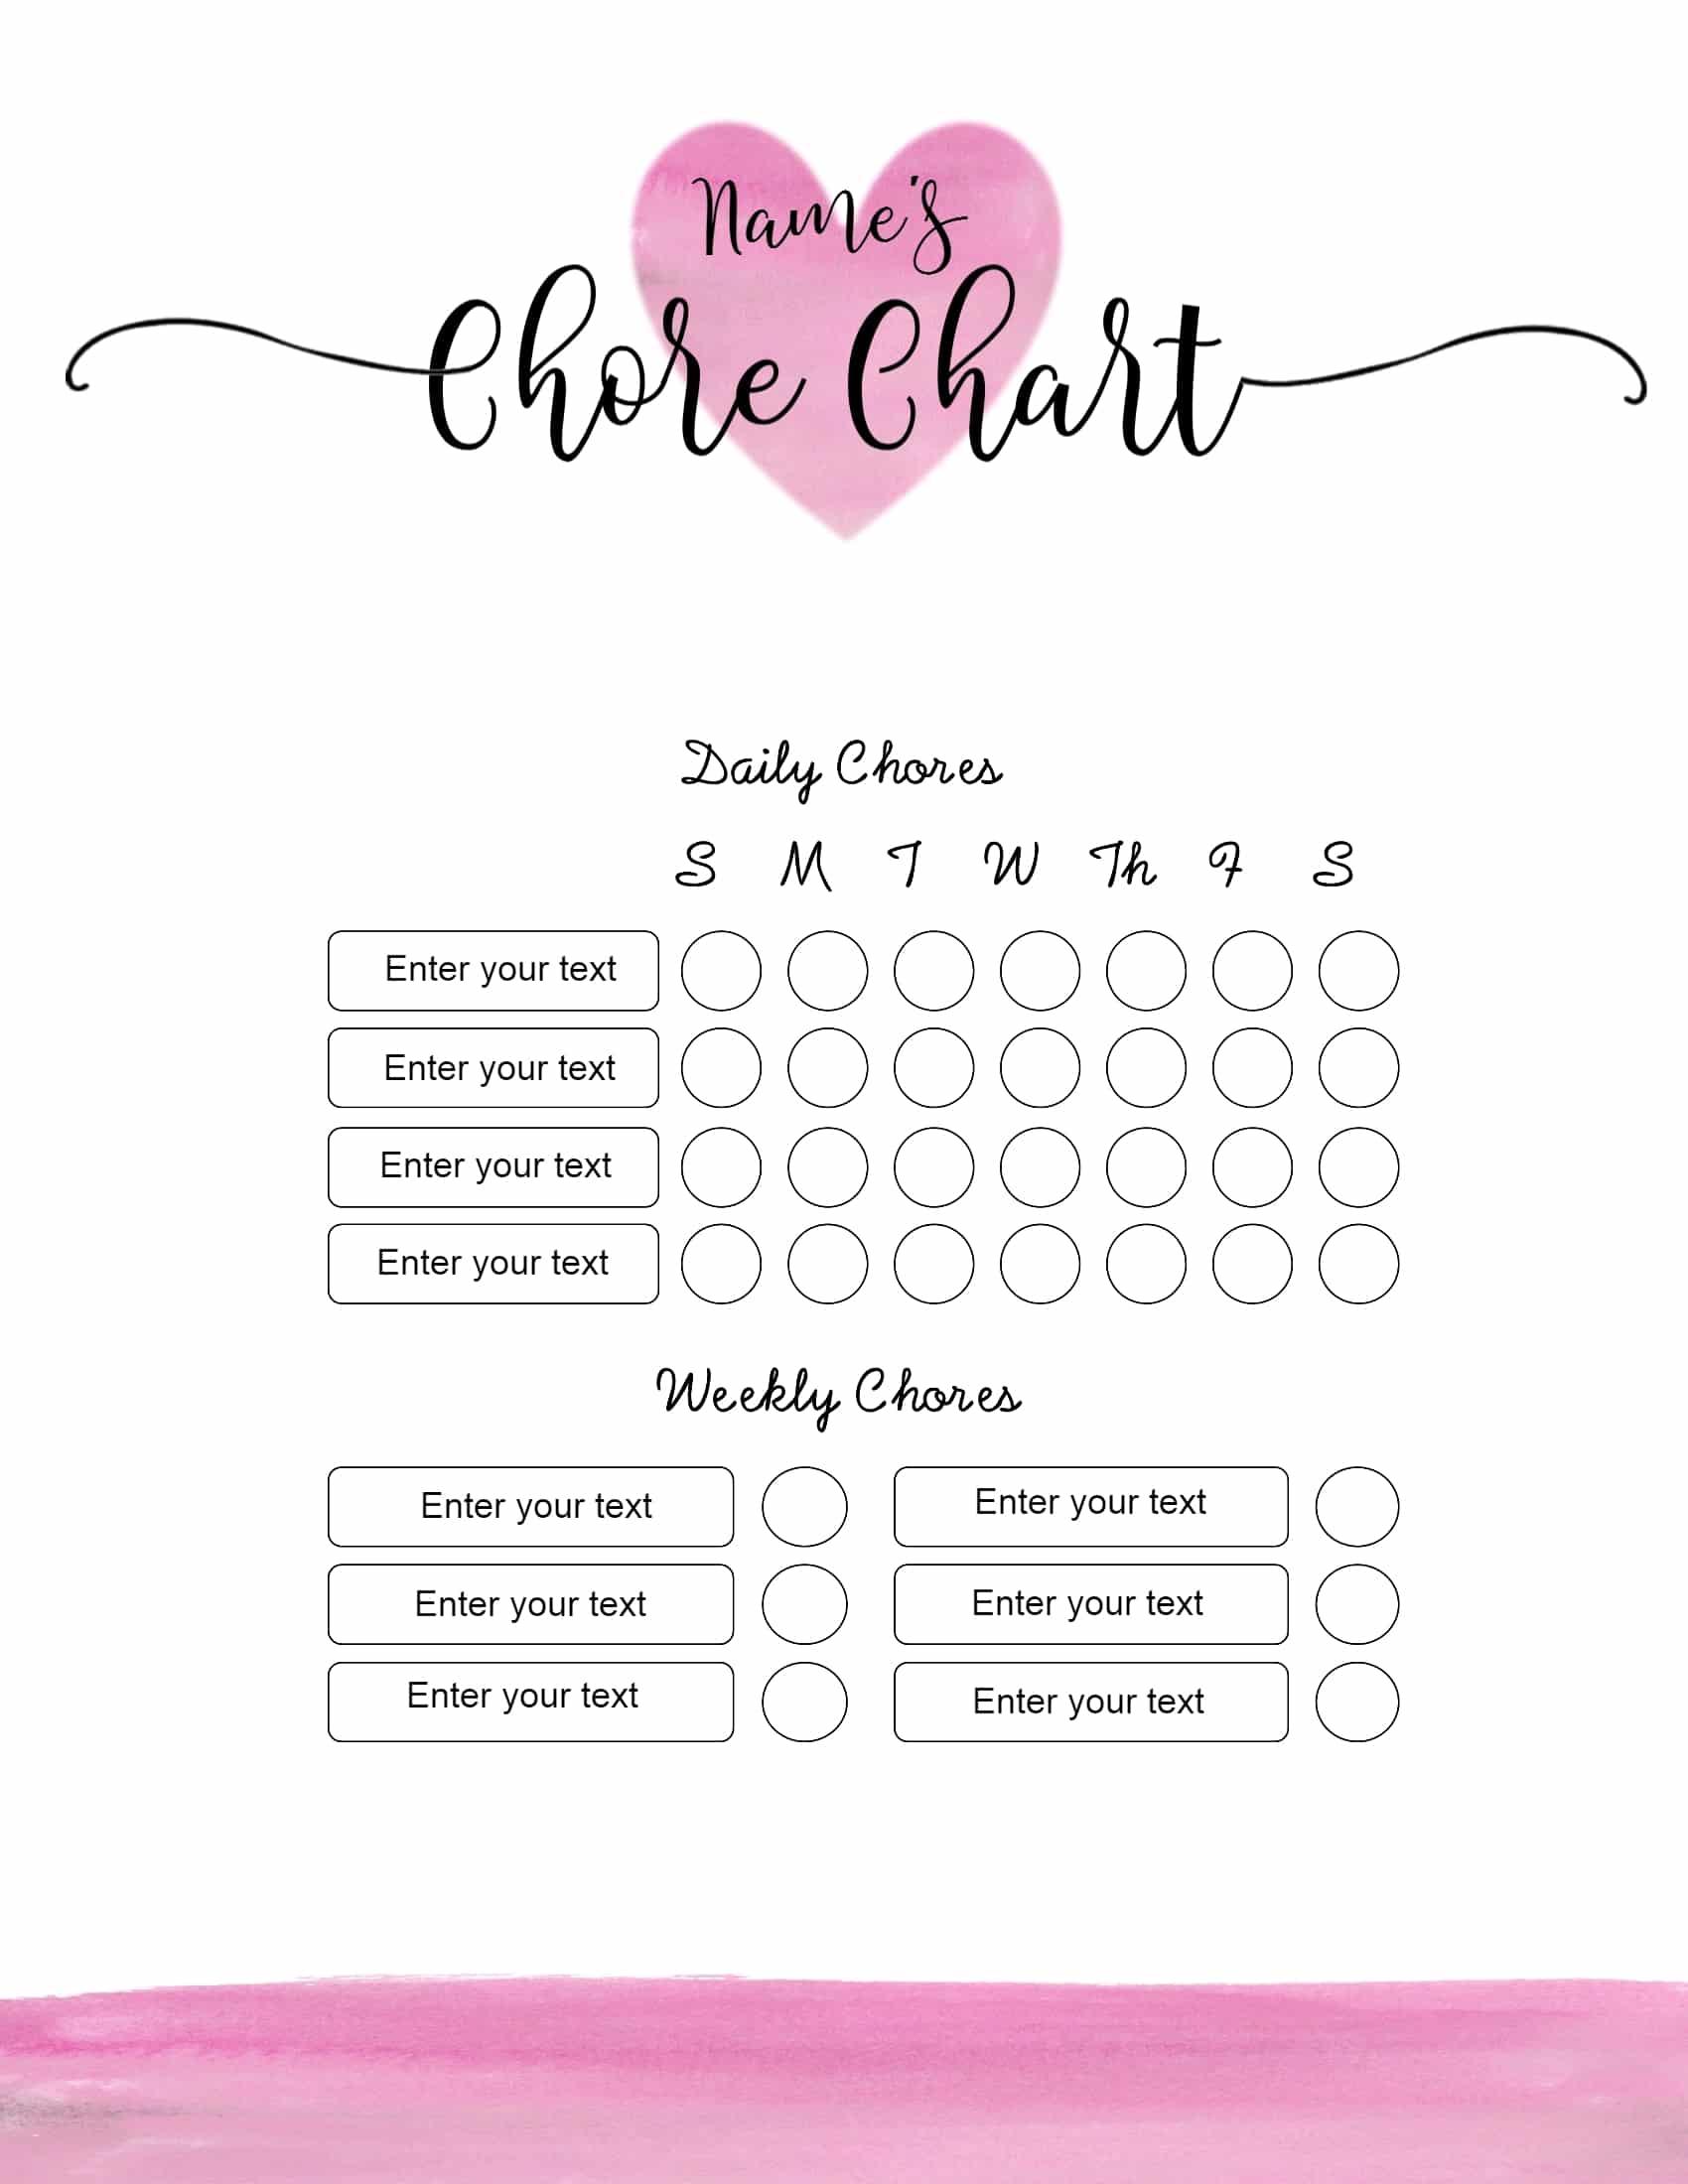 chore-chart-for-adults-templates-printable-templates-free